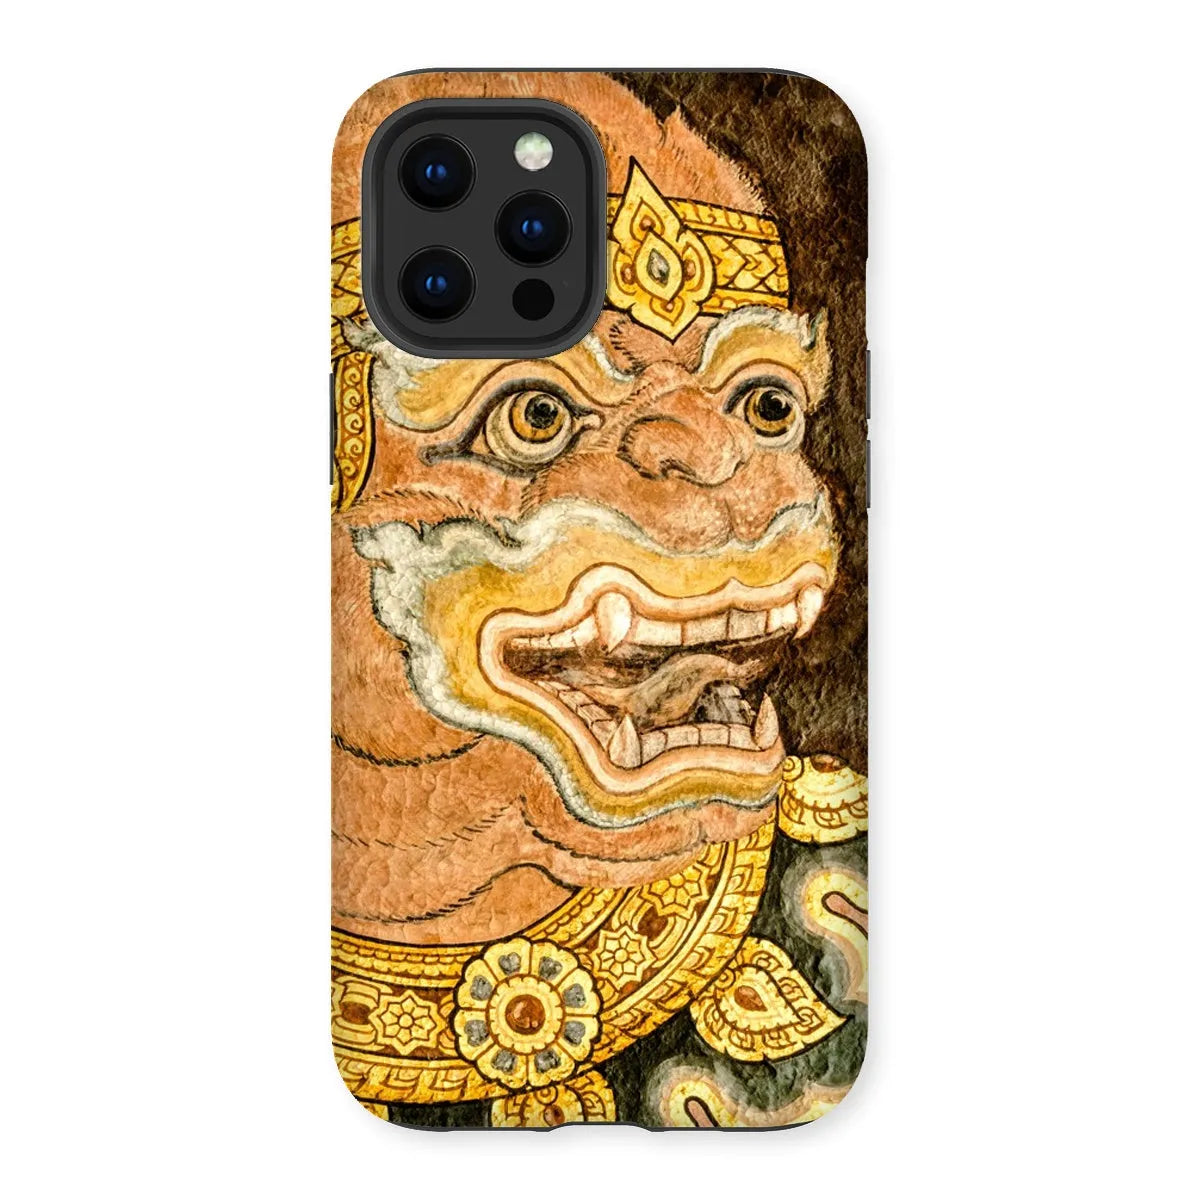 Monkey See - Traditional Thai Aesthetic Art Phone Case - Iphone 12 Pro Max / Matte - Mobile Phone Cases - Aesthetic Art